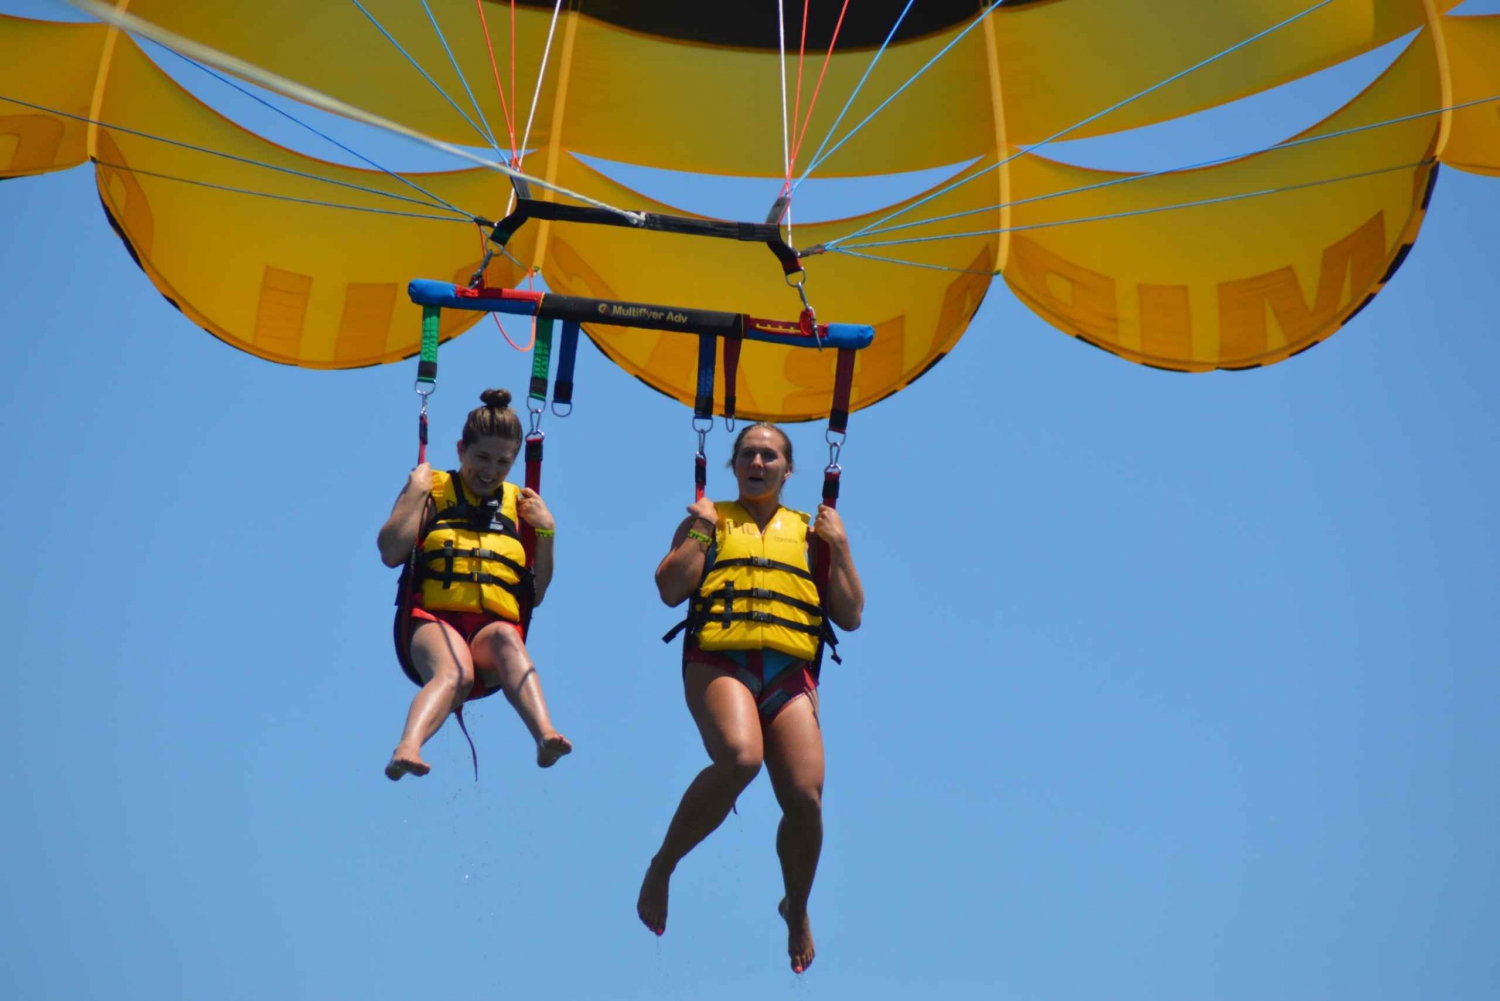 Miami: Parasailing Experience in Biscayne Bay